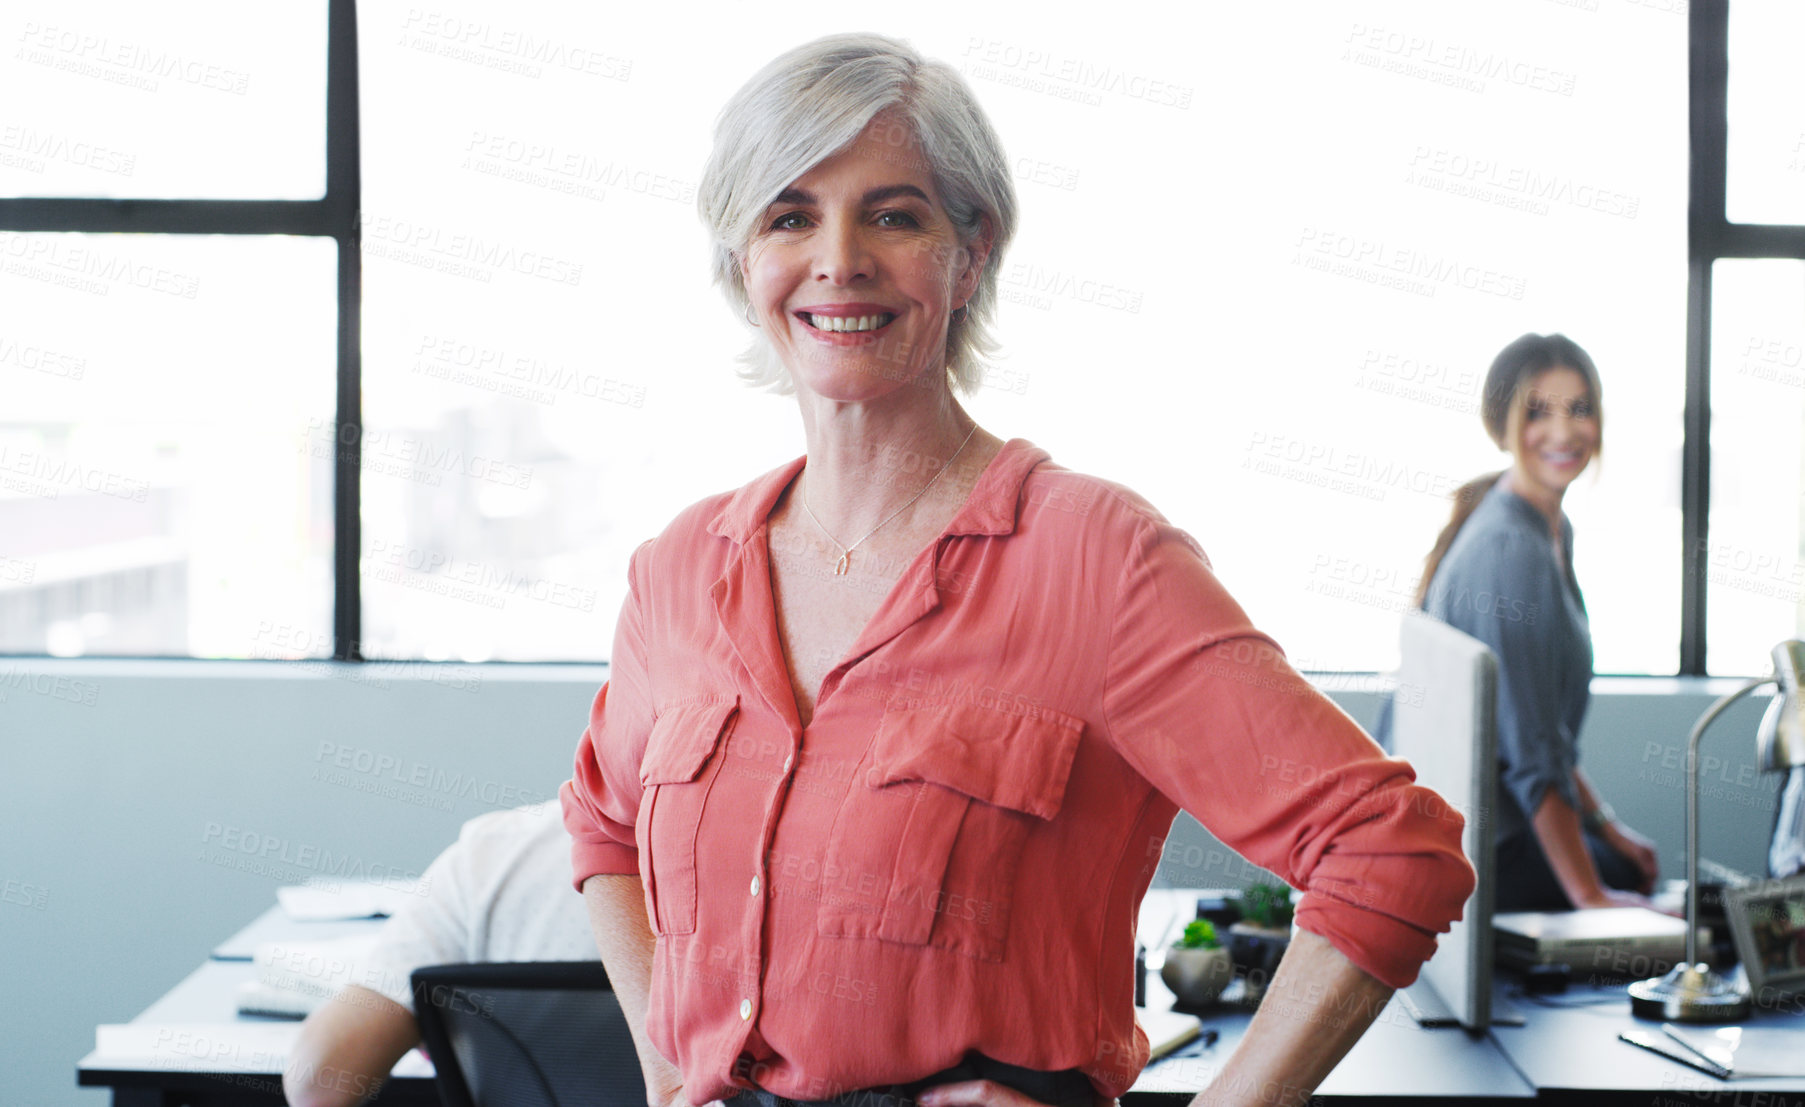 Buy stock photo Portrait of a confident mature businesswoman working in a modern office with her colleagues in the background